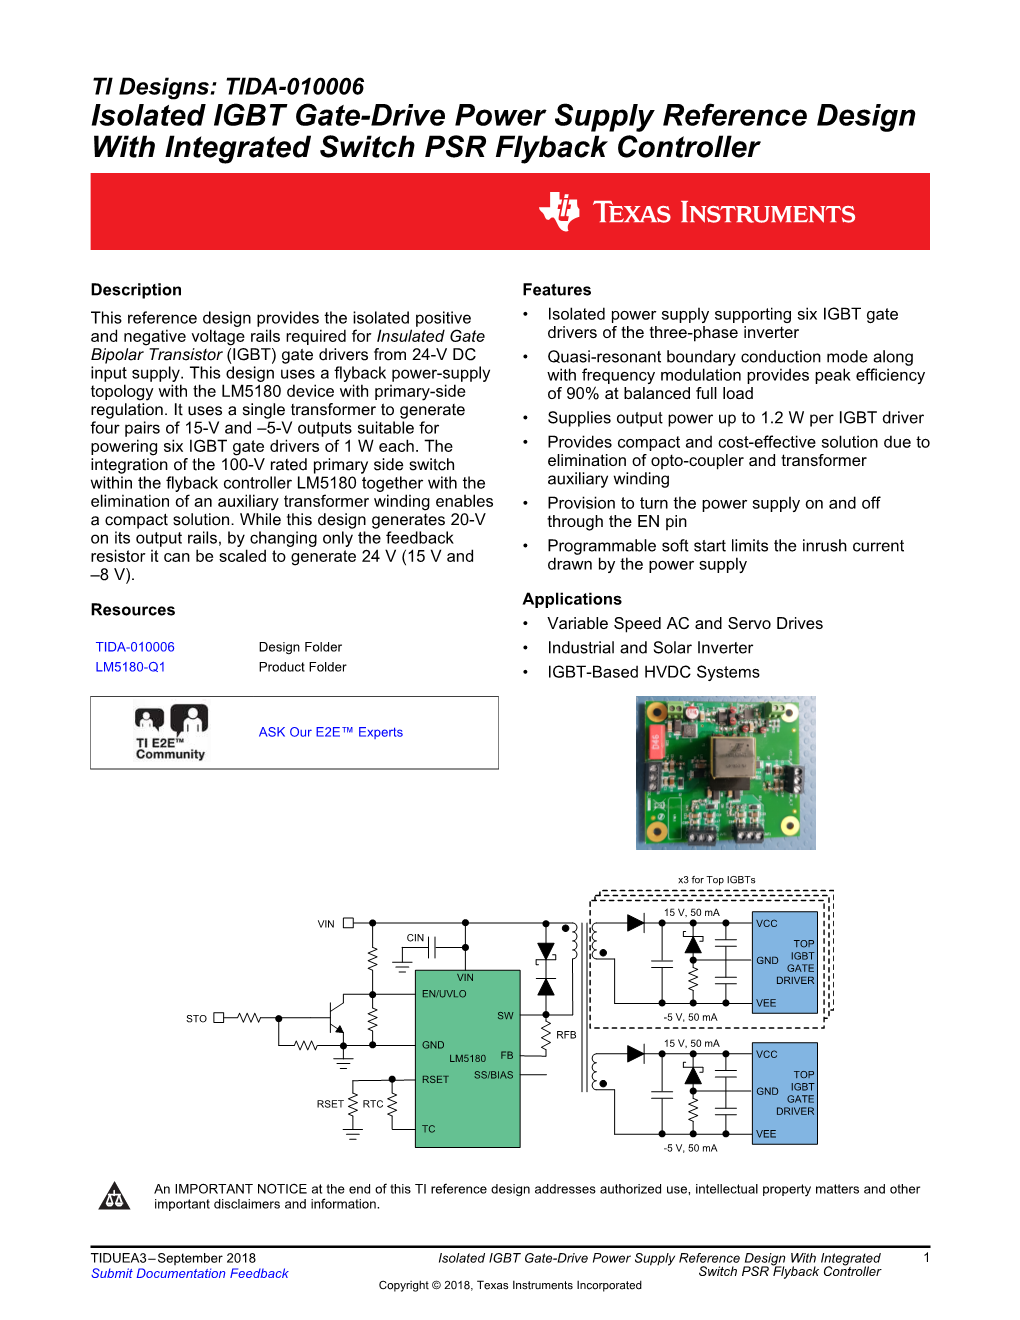 TI Designs: TIDA-010006 Isolated IGBT Gate-Drive Power Supply Reference Design with Integrated Switch PSR Flyback Controller